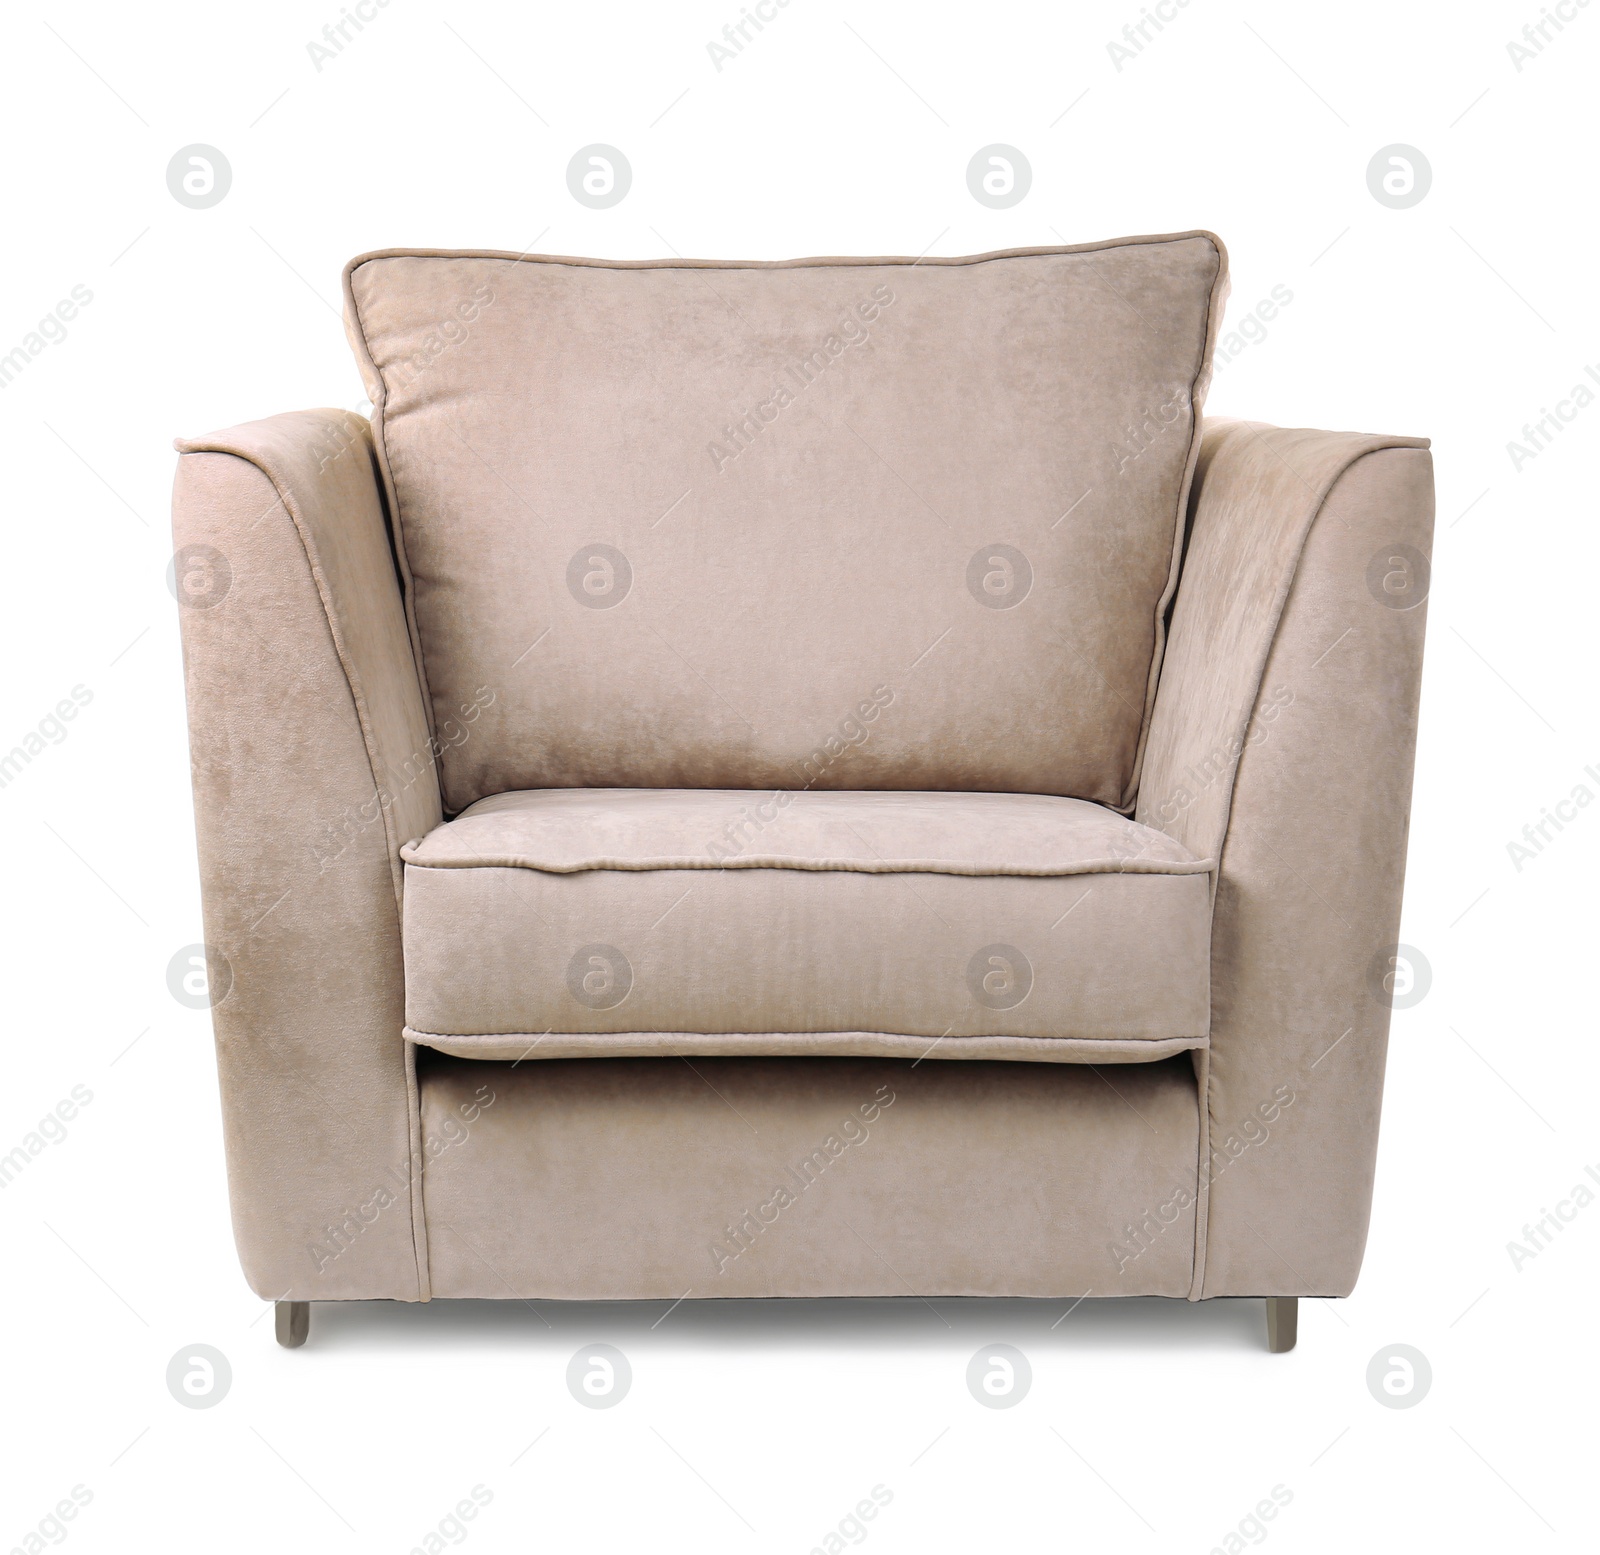 Image of One comfortable pale orange yellow armchair isolated on white